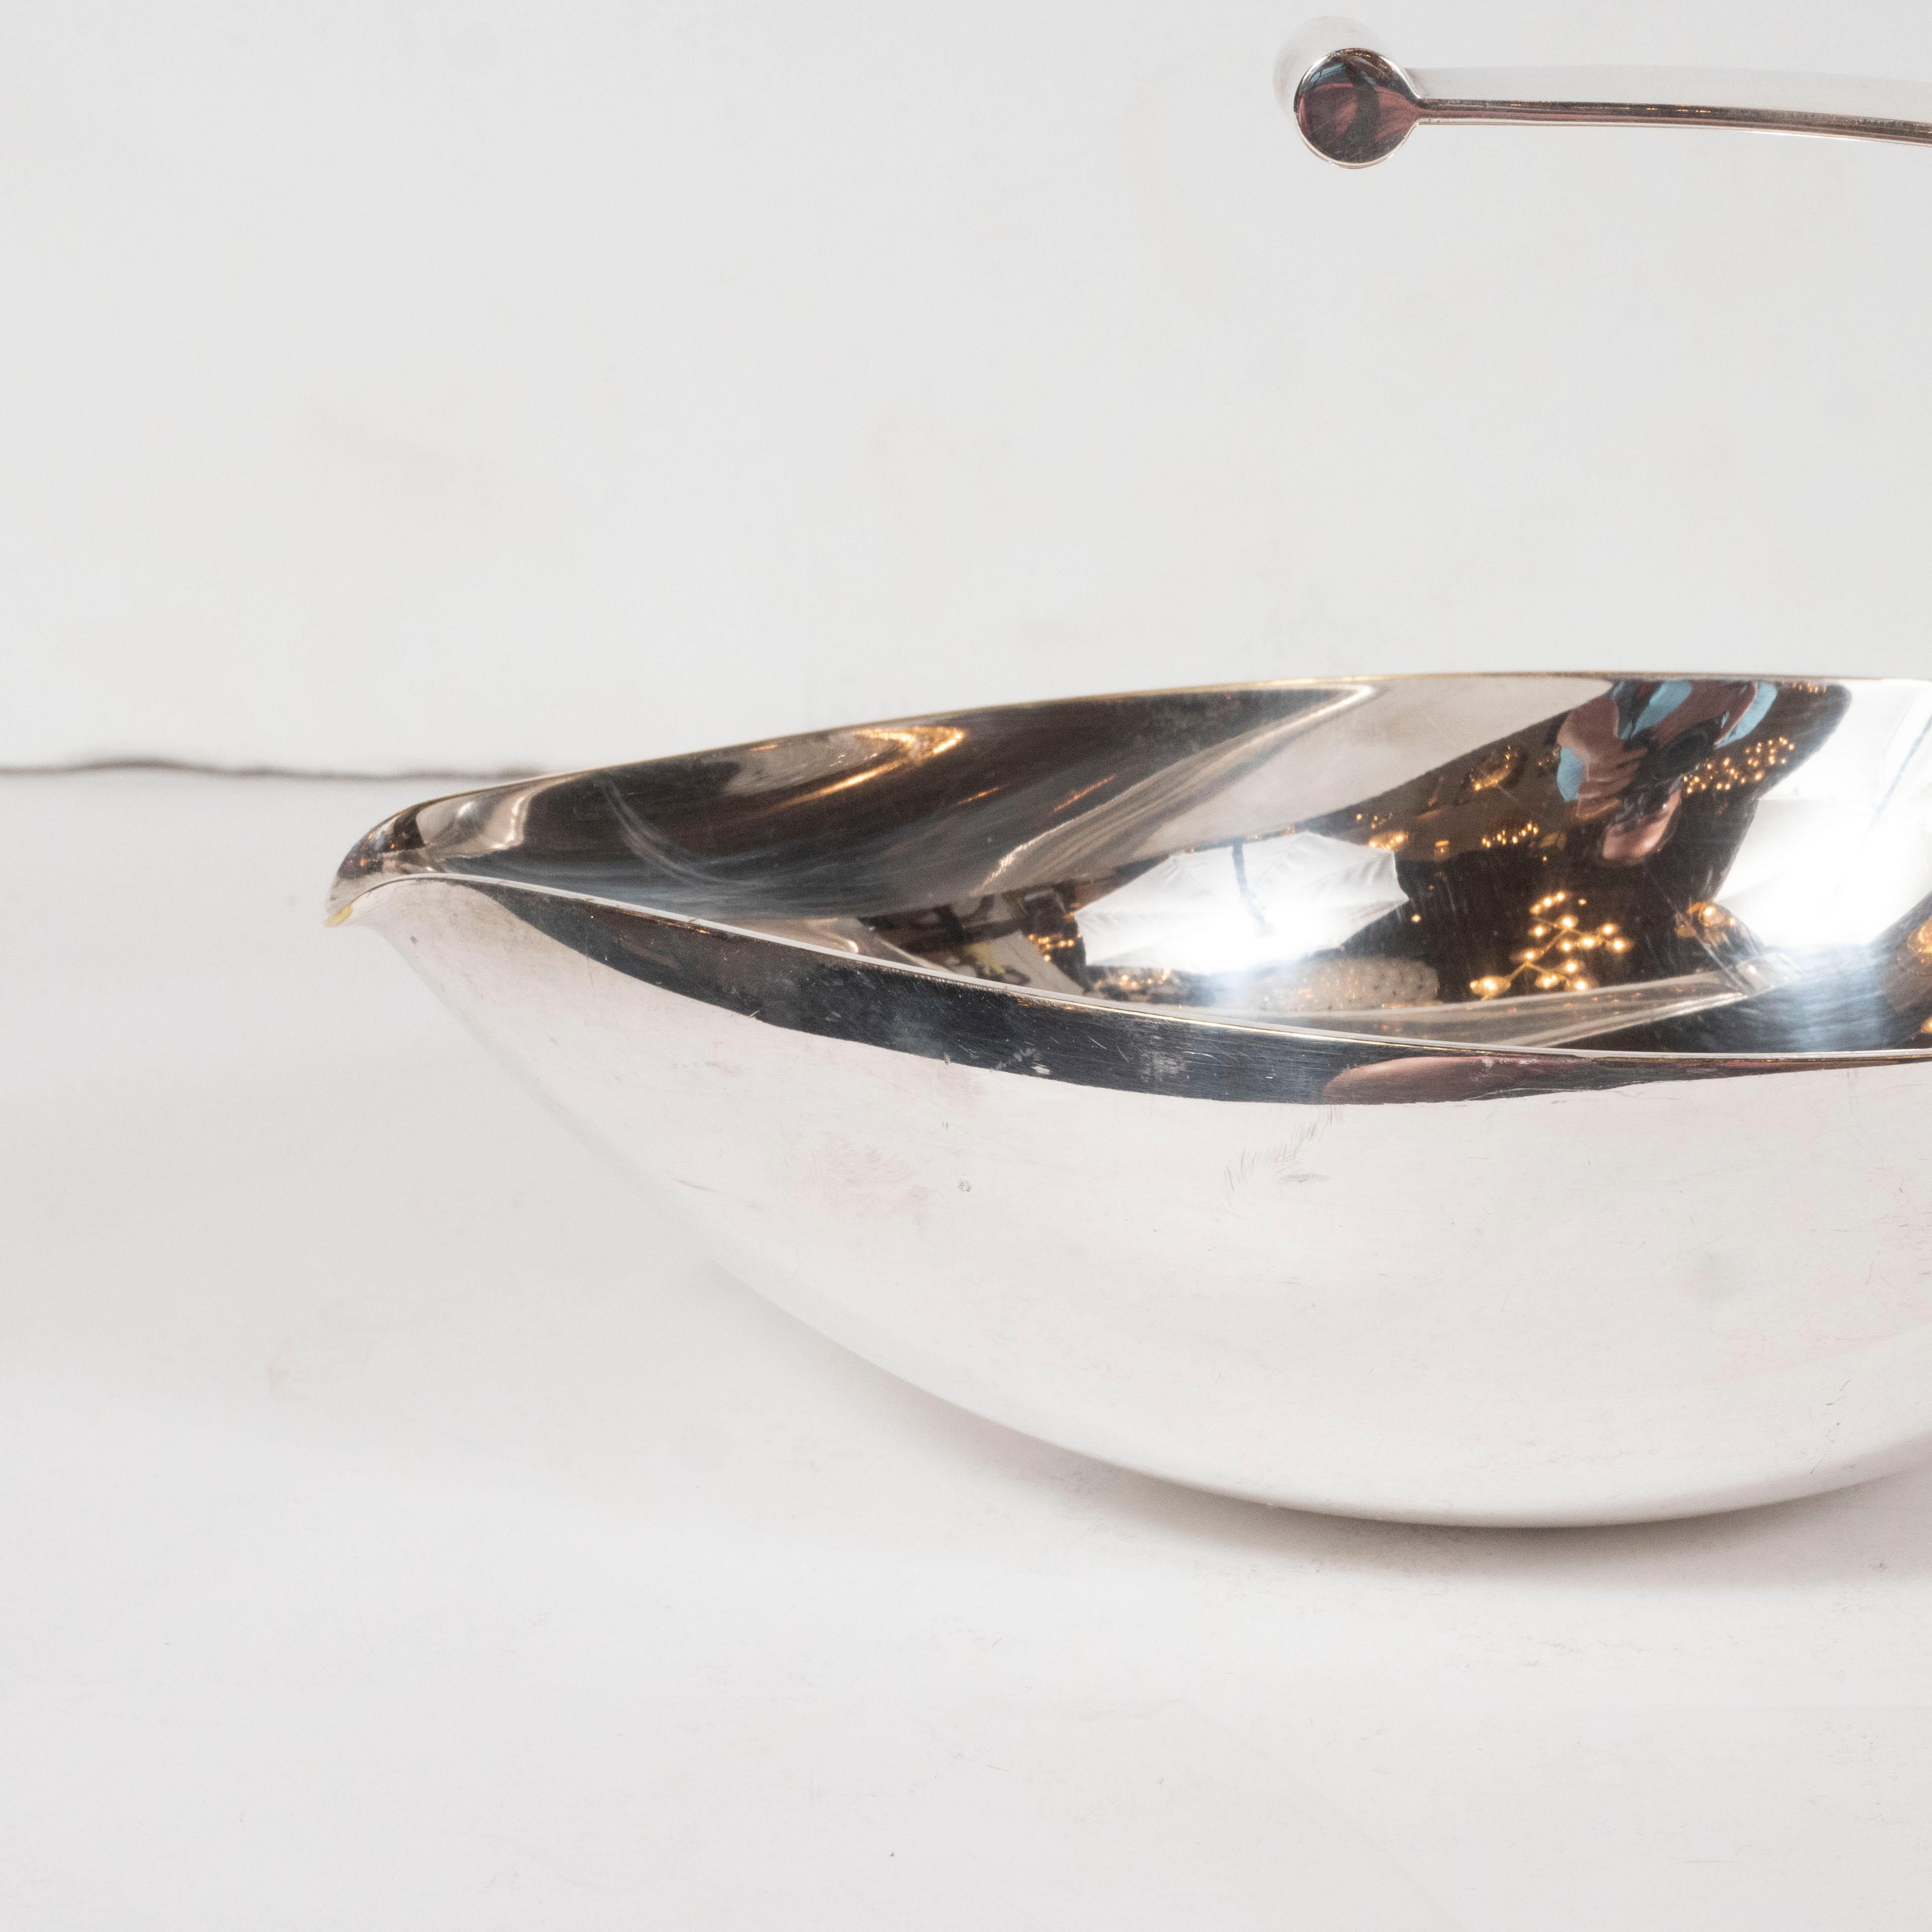 Mid-20th Century Italian Mid-Century Modern Cantilevered Silverplated Decorative Dish Signed Mesa